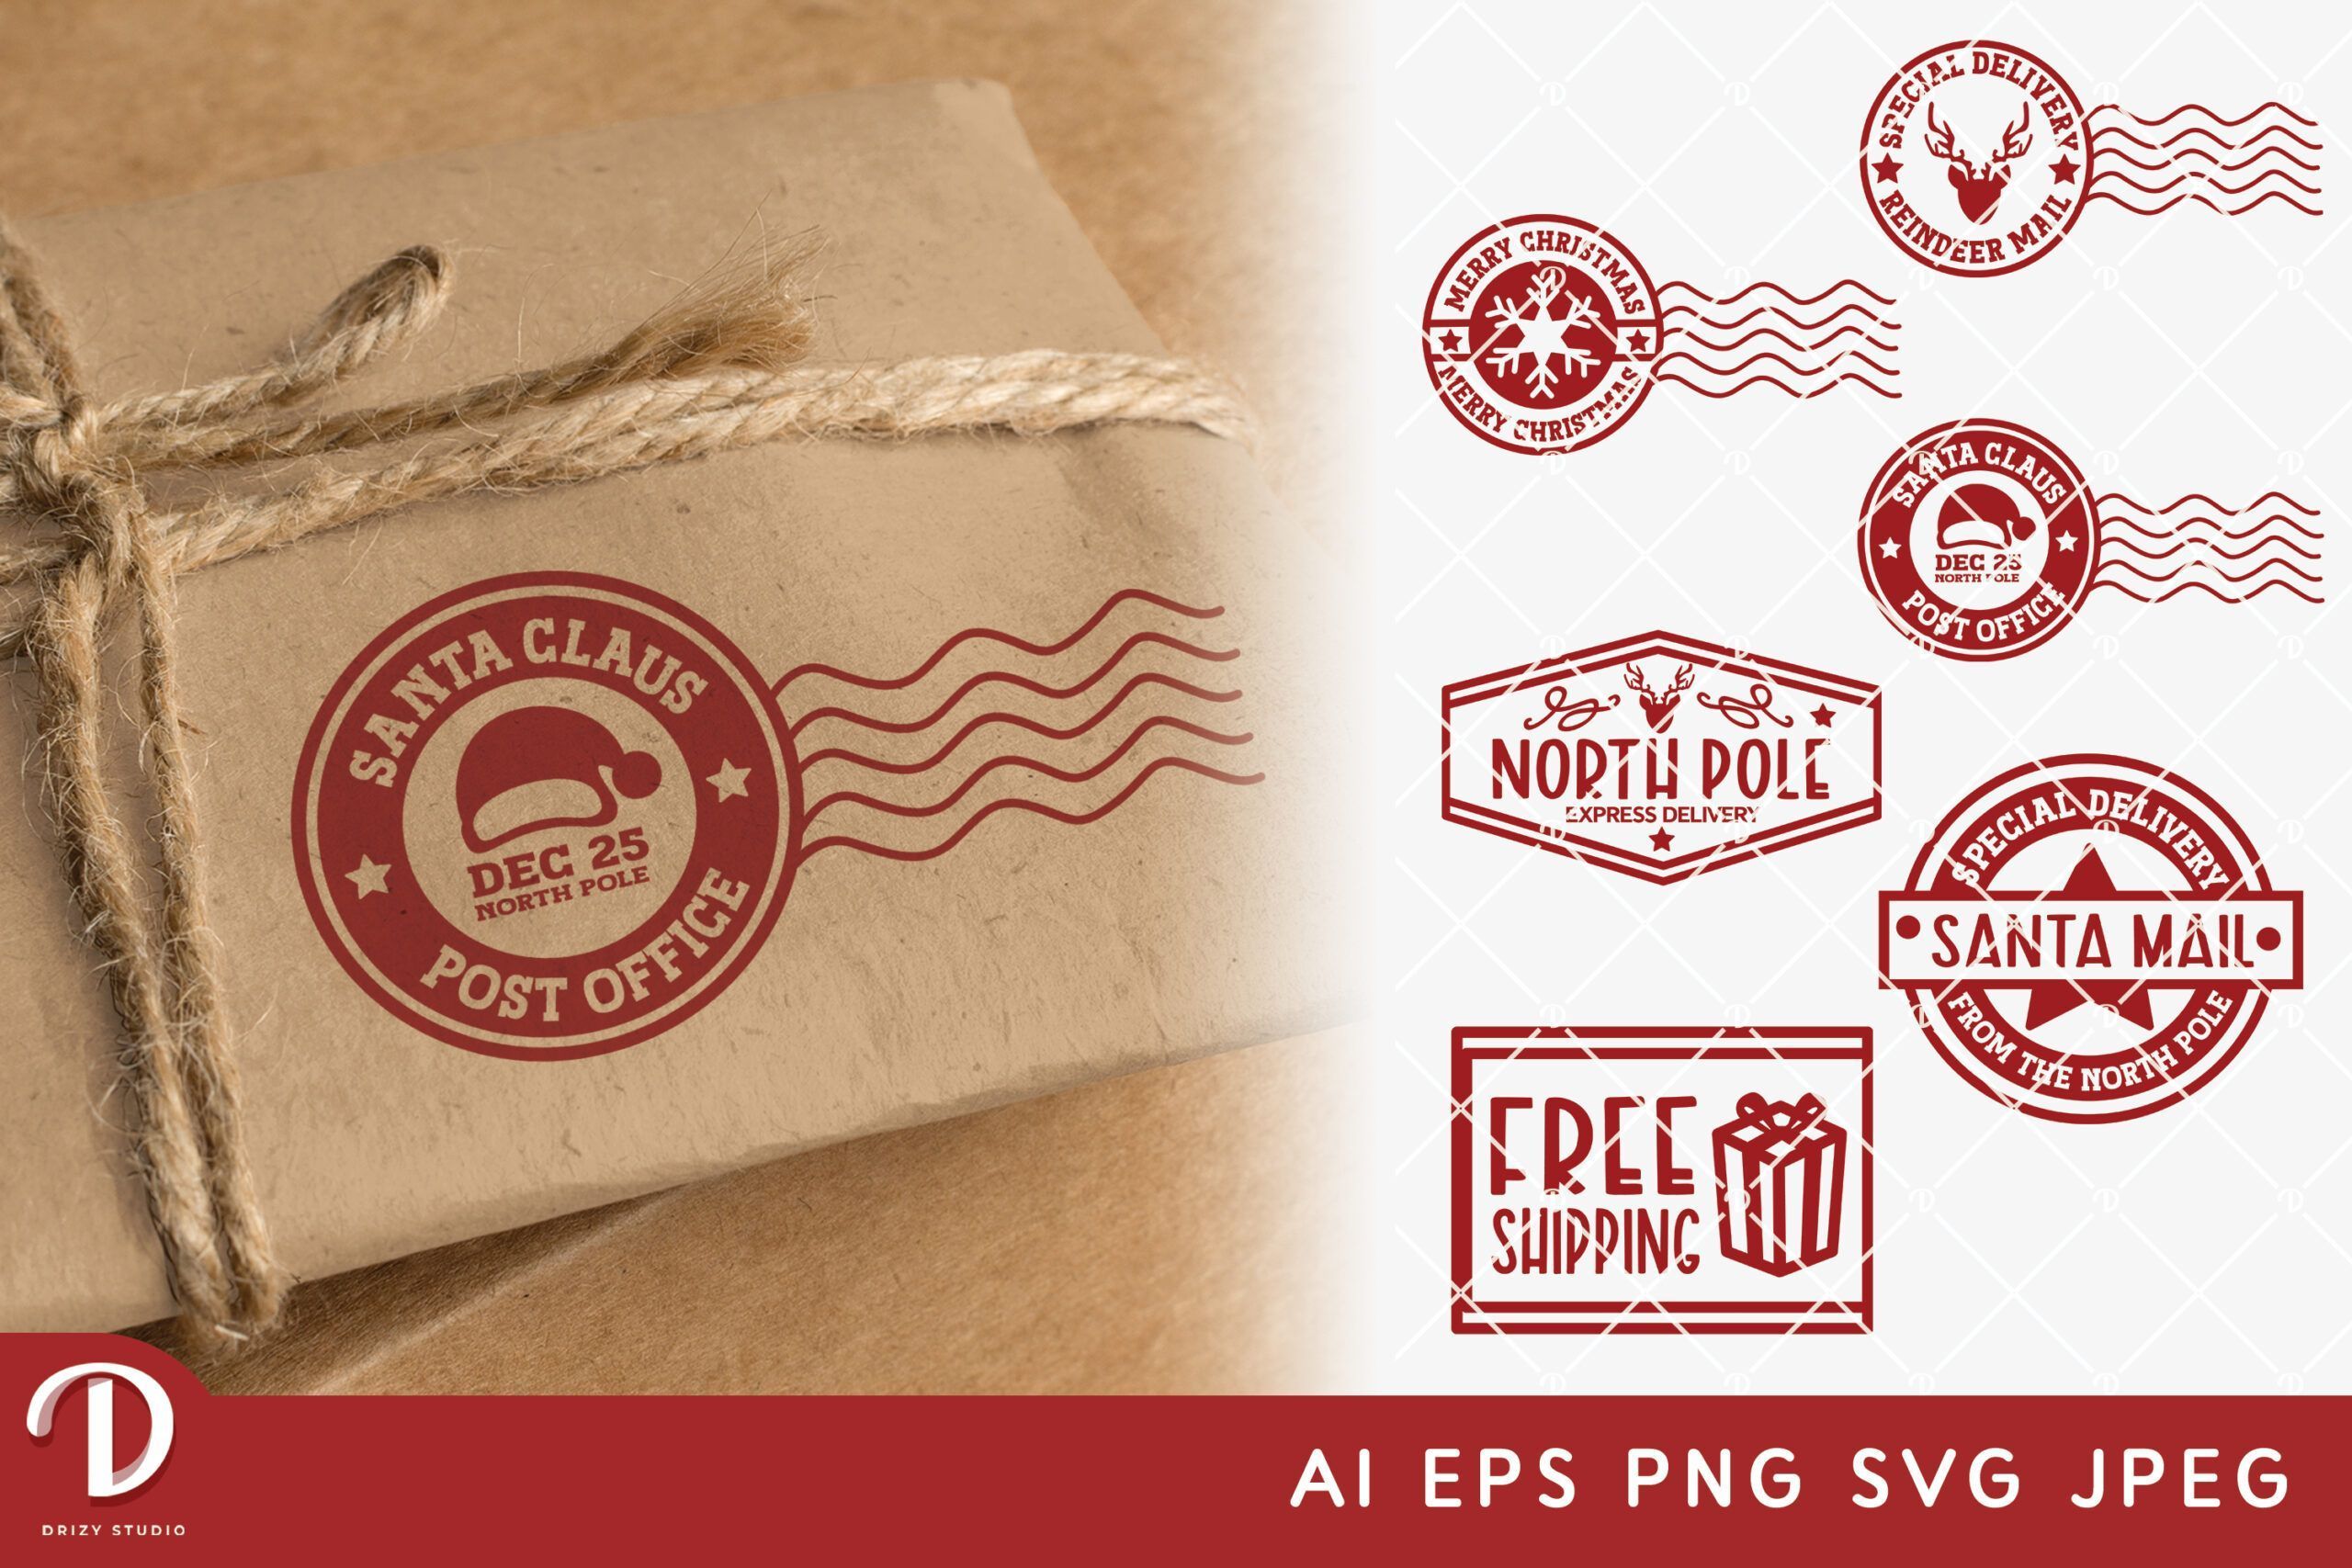 North Pole Post Mail Stamps SVG. Christmas designs